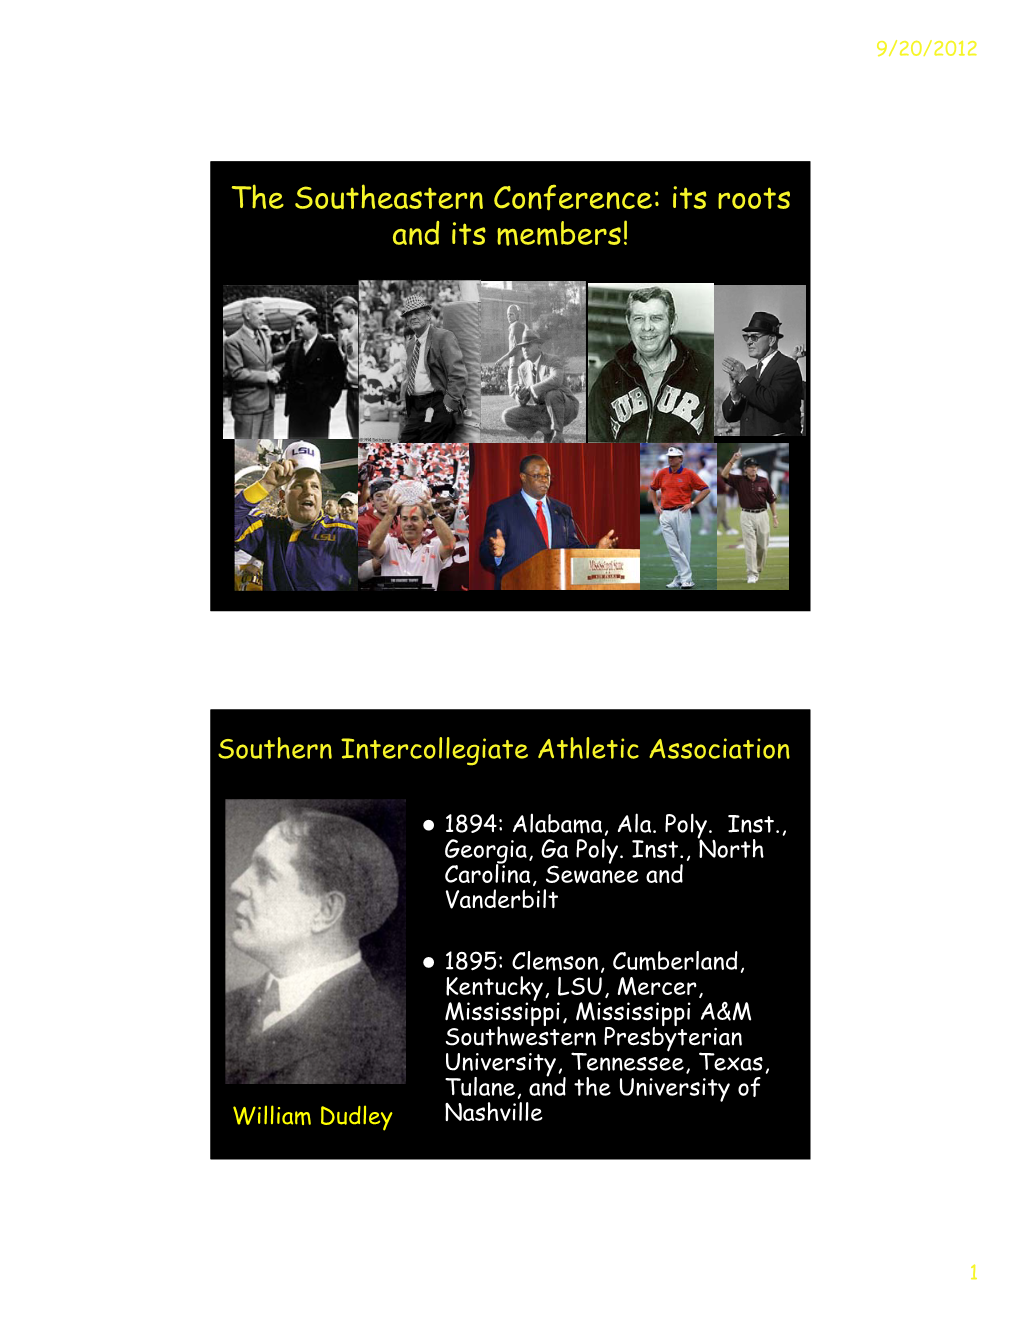 The Southeastern Conference: Its Roots and Its Members!